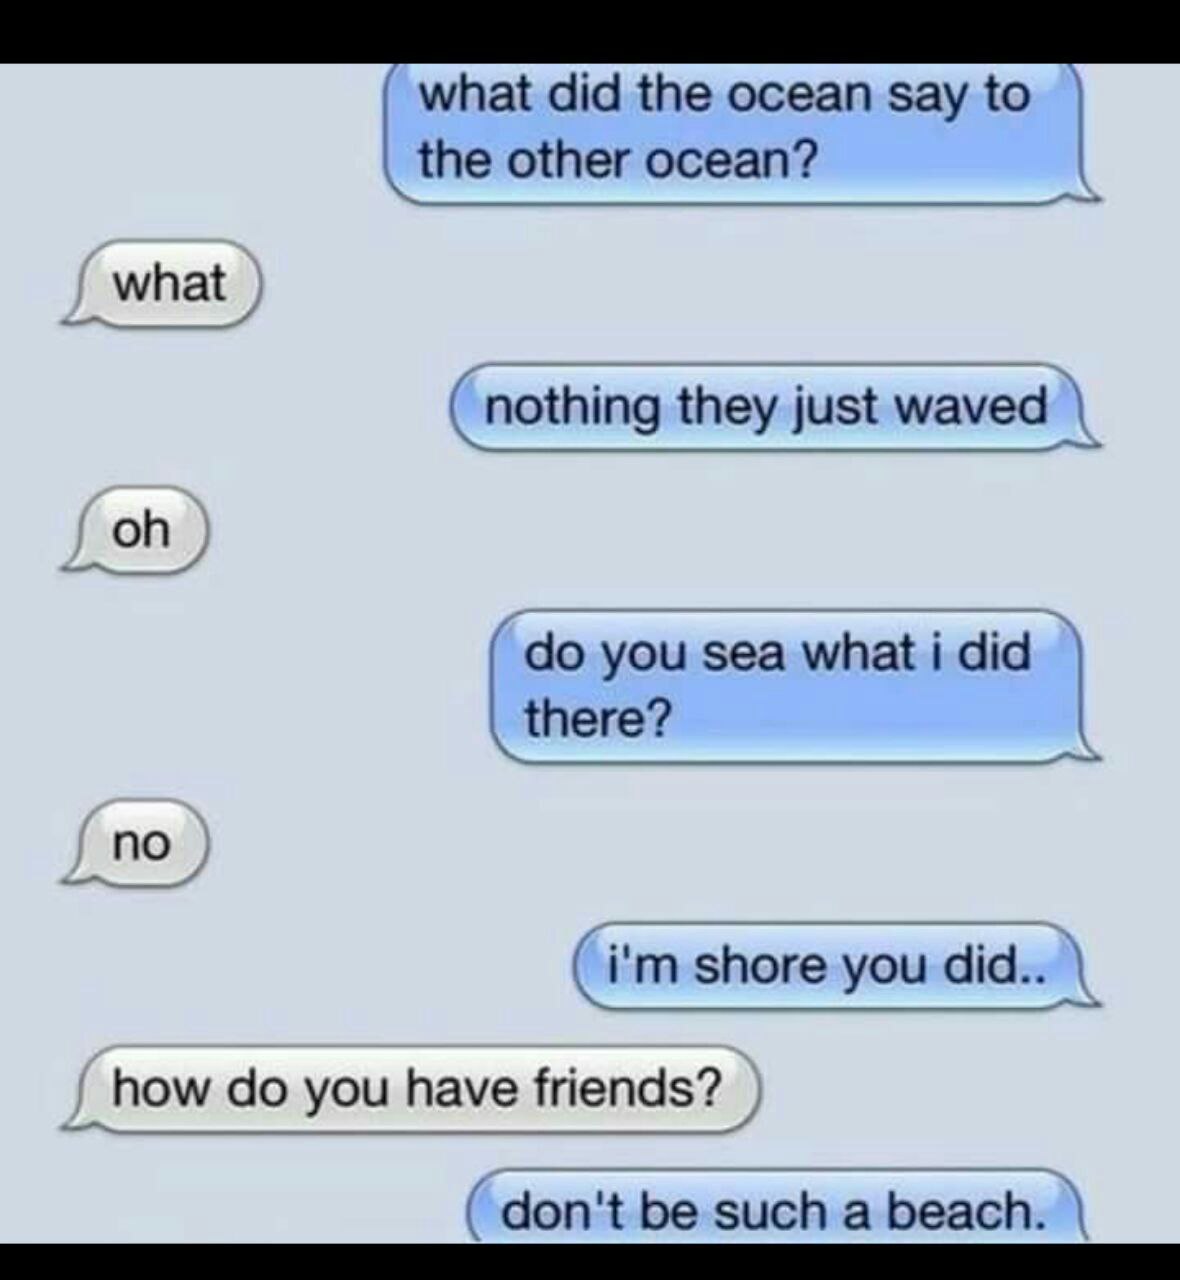 did the ocean say to the other ocean - what did the ocean say to the other ocean? what nothing they just waved oh do you sea what i did there? no i'm shore you did.. how do you have friends? don't be such a beach.